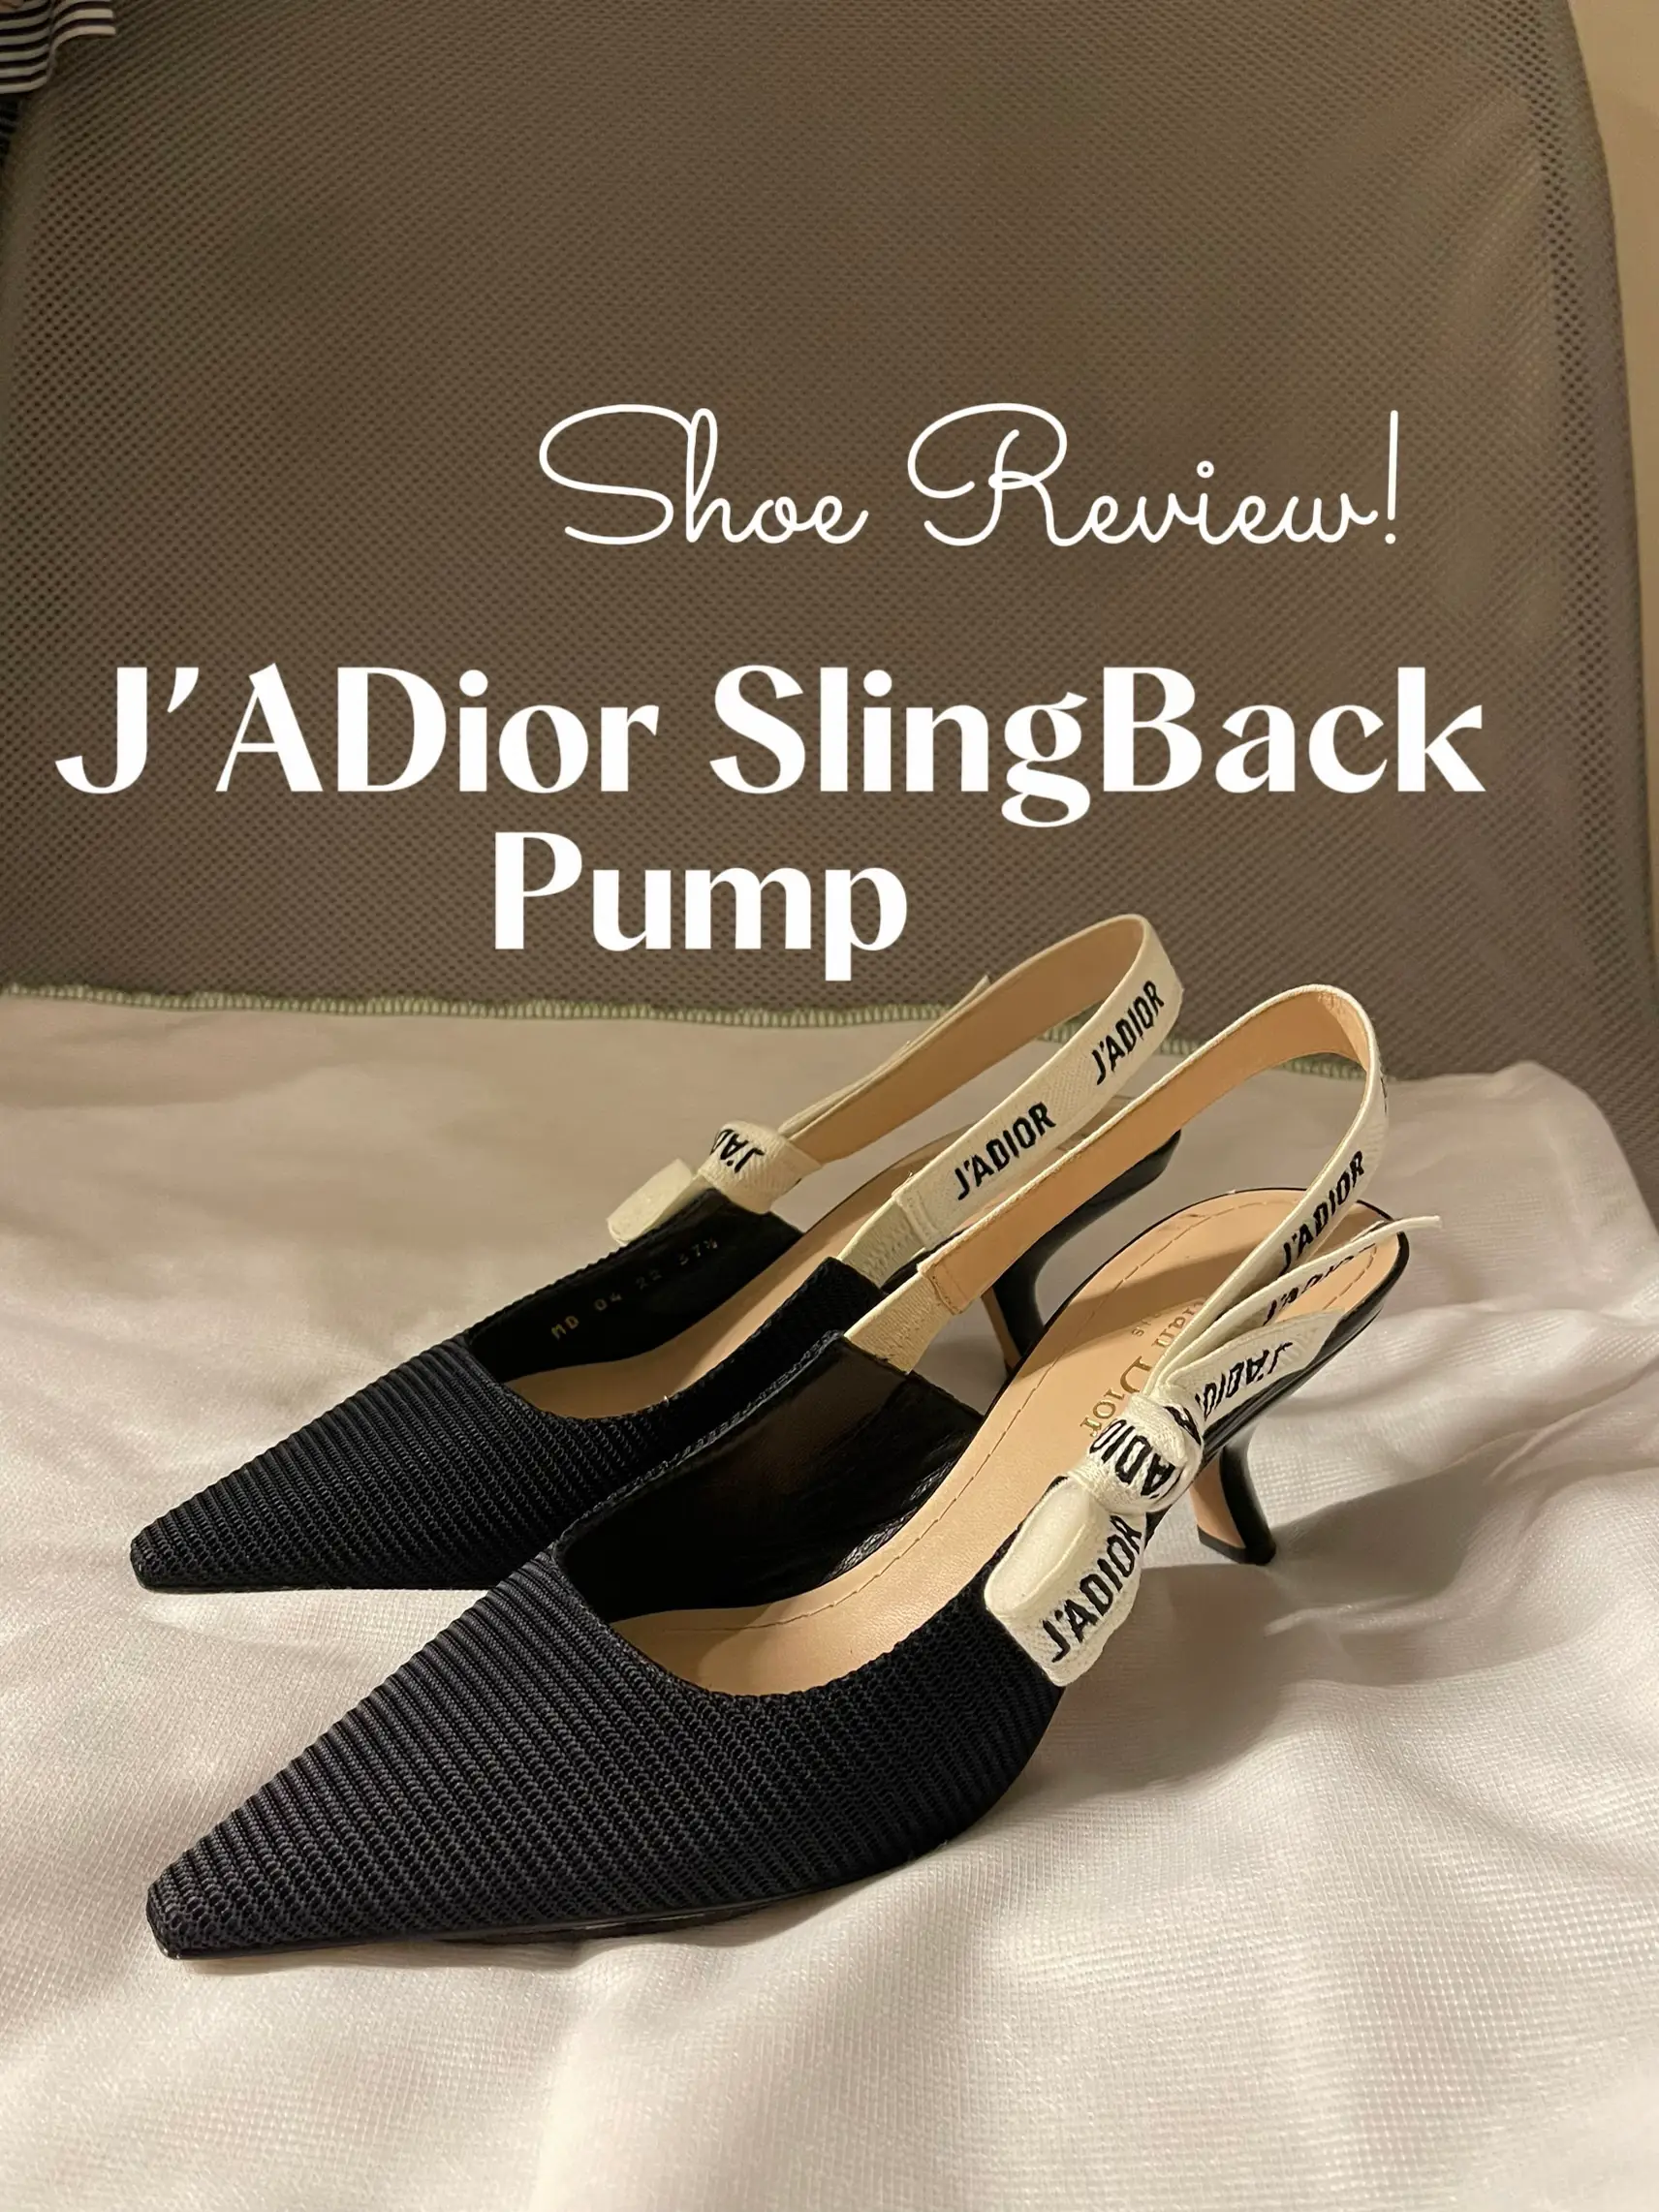 J'ADior SlingBack Review!, Gallery posted by Isabelle